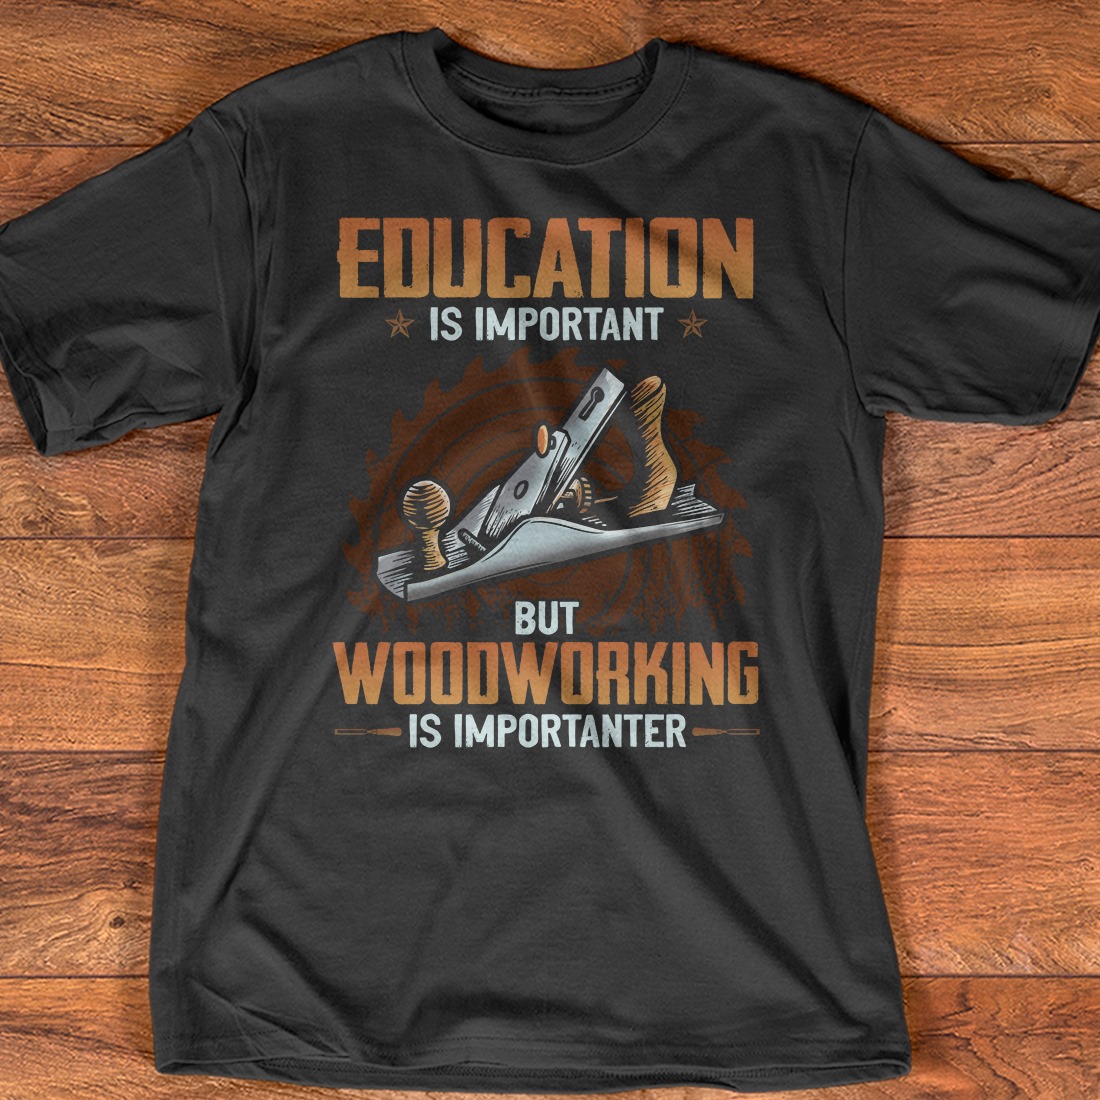 Education is important but woodworking is importanter